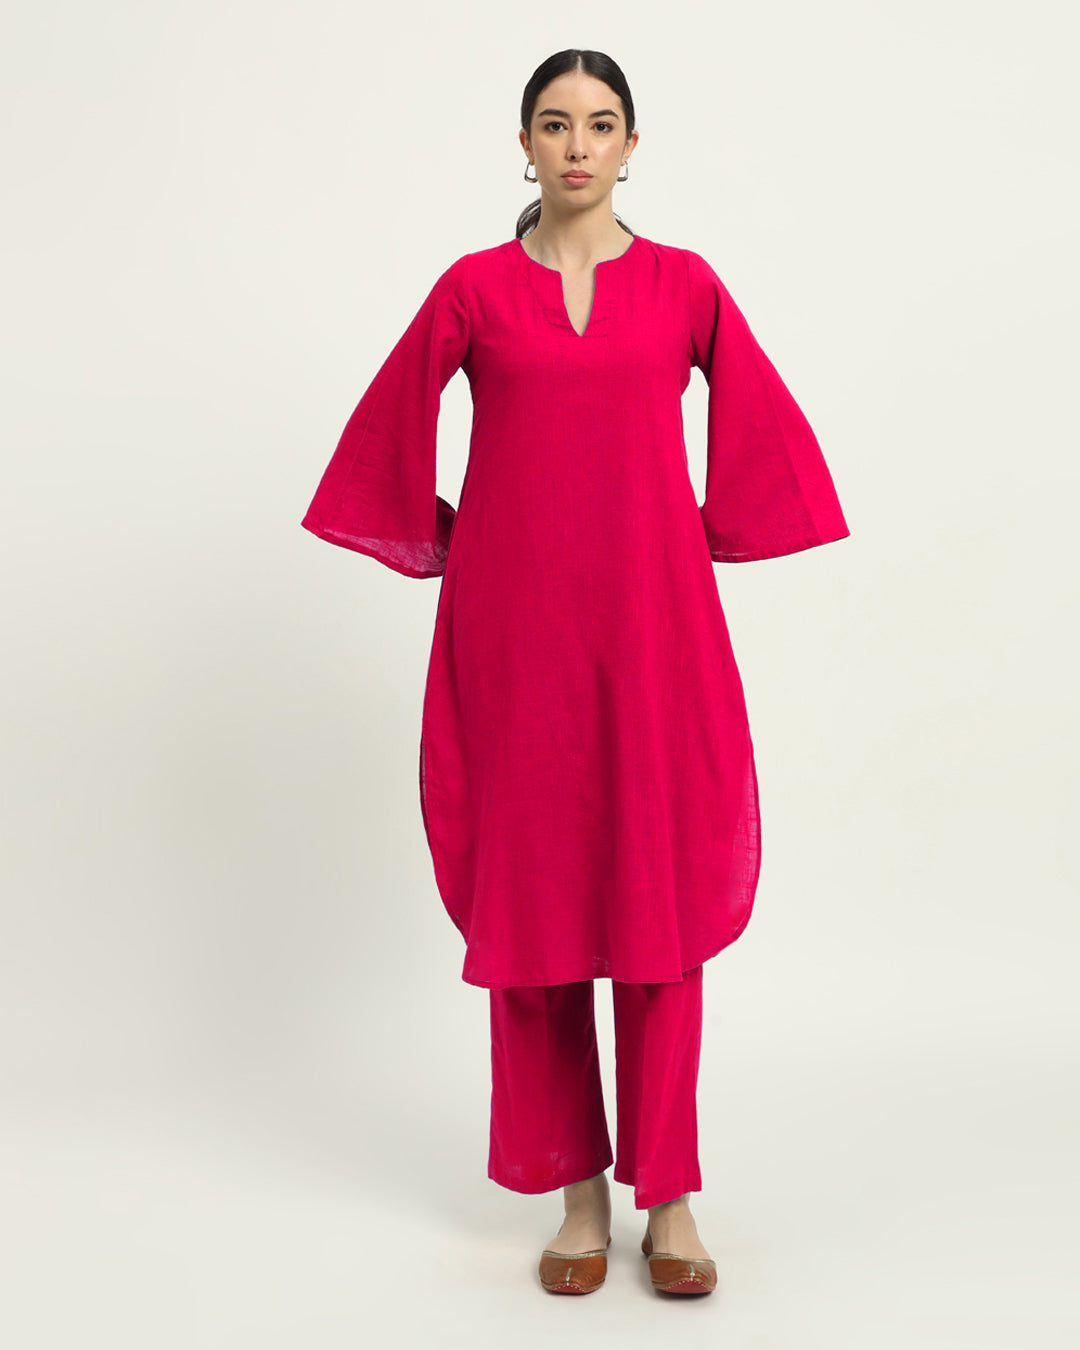 Queen's Gulabi Rounded Reverie Solid Kurta (Without Bottoms)